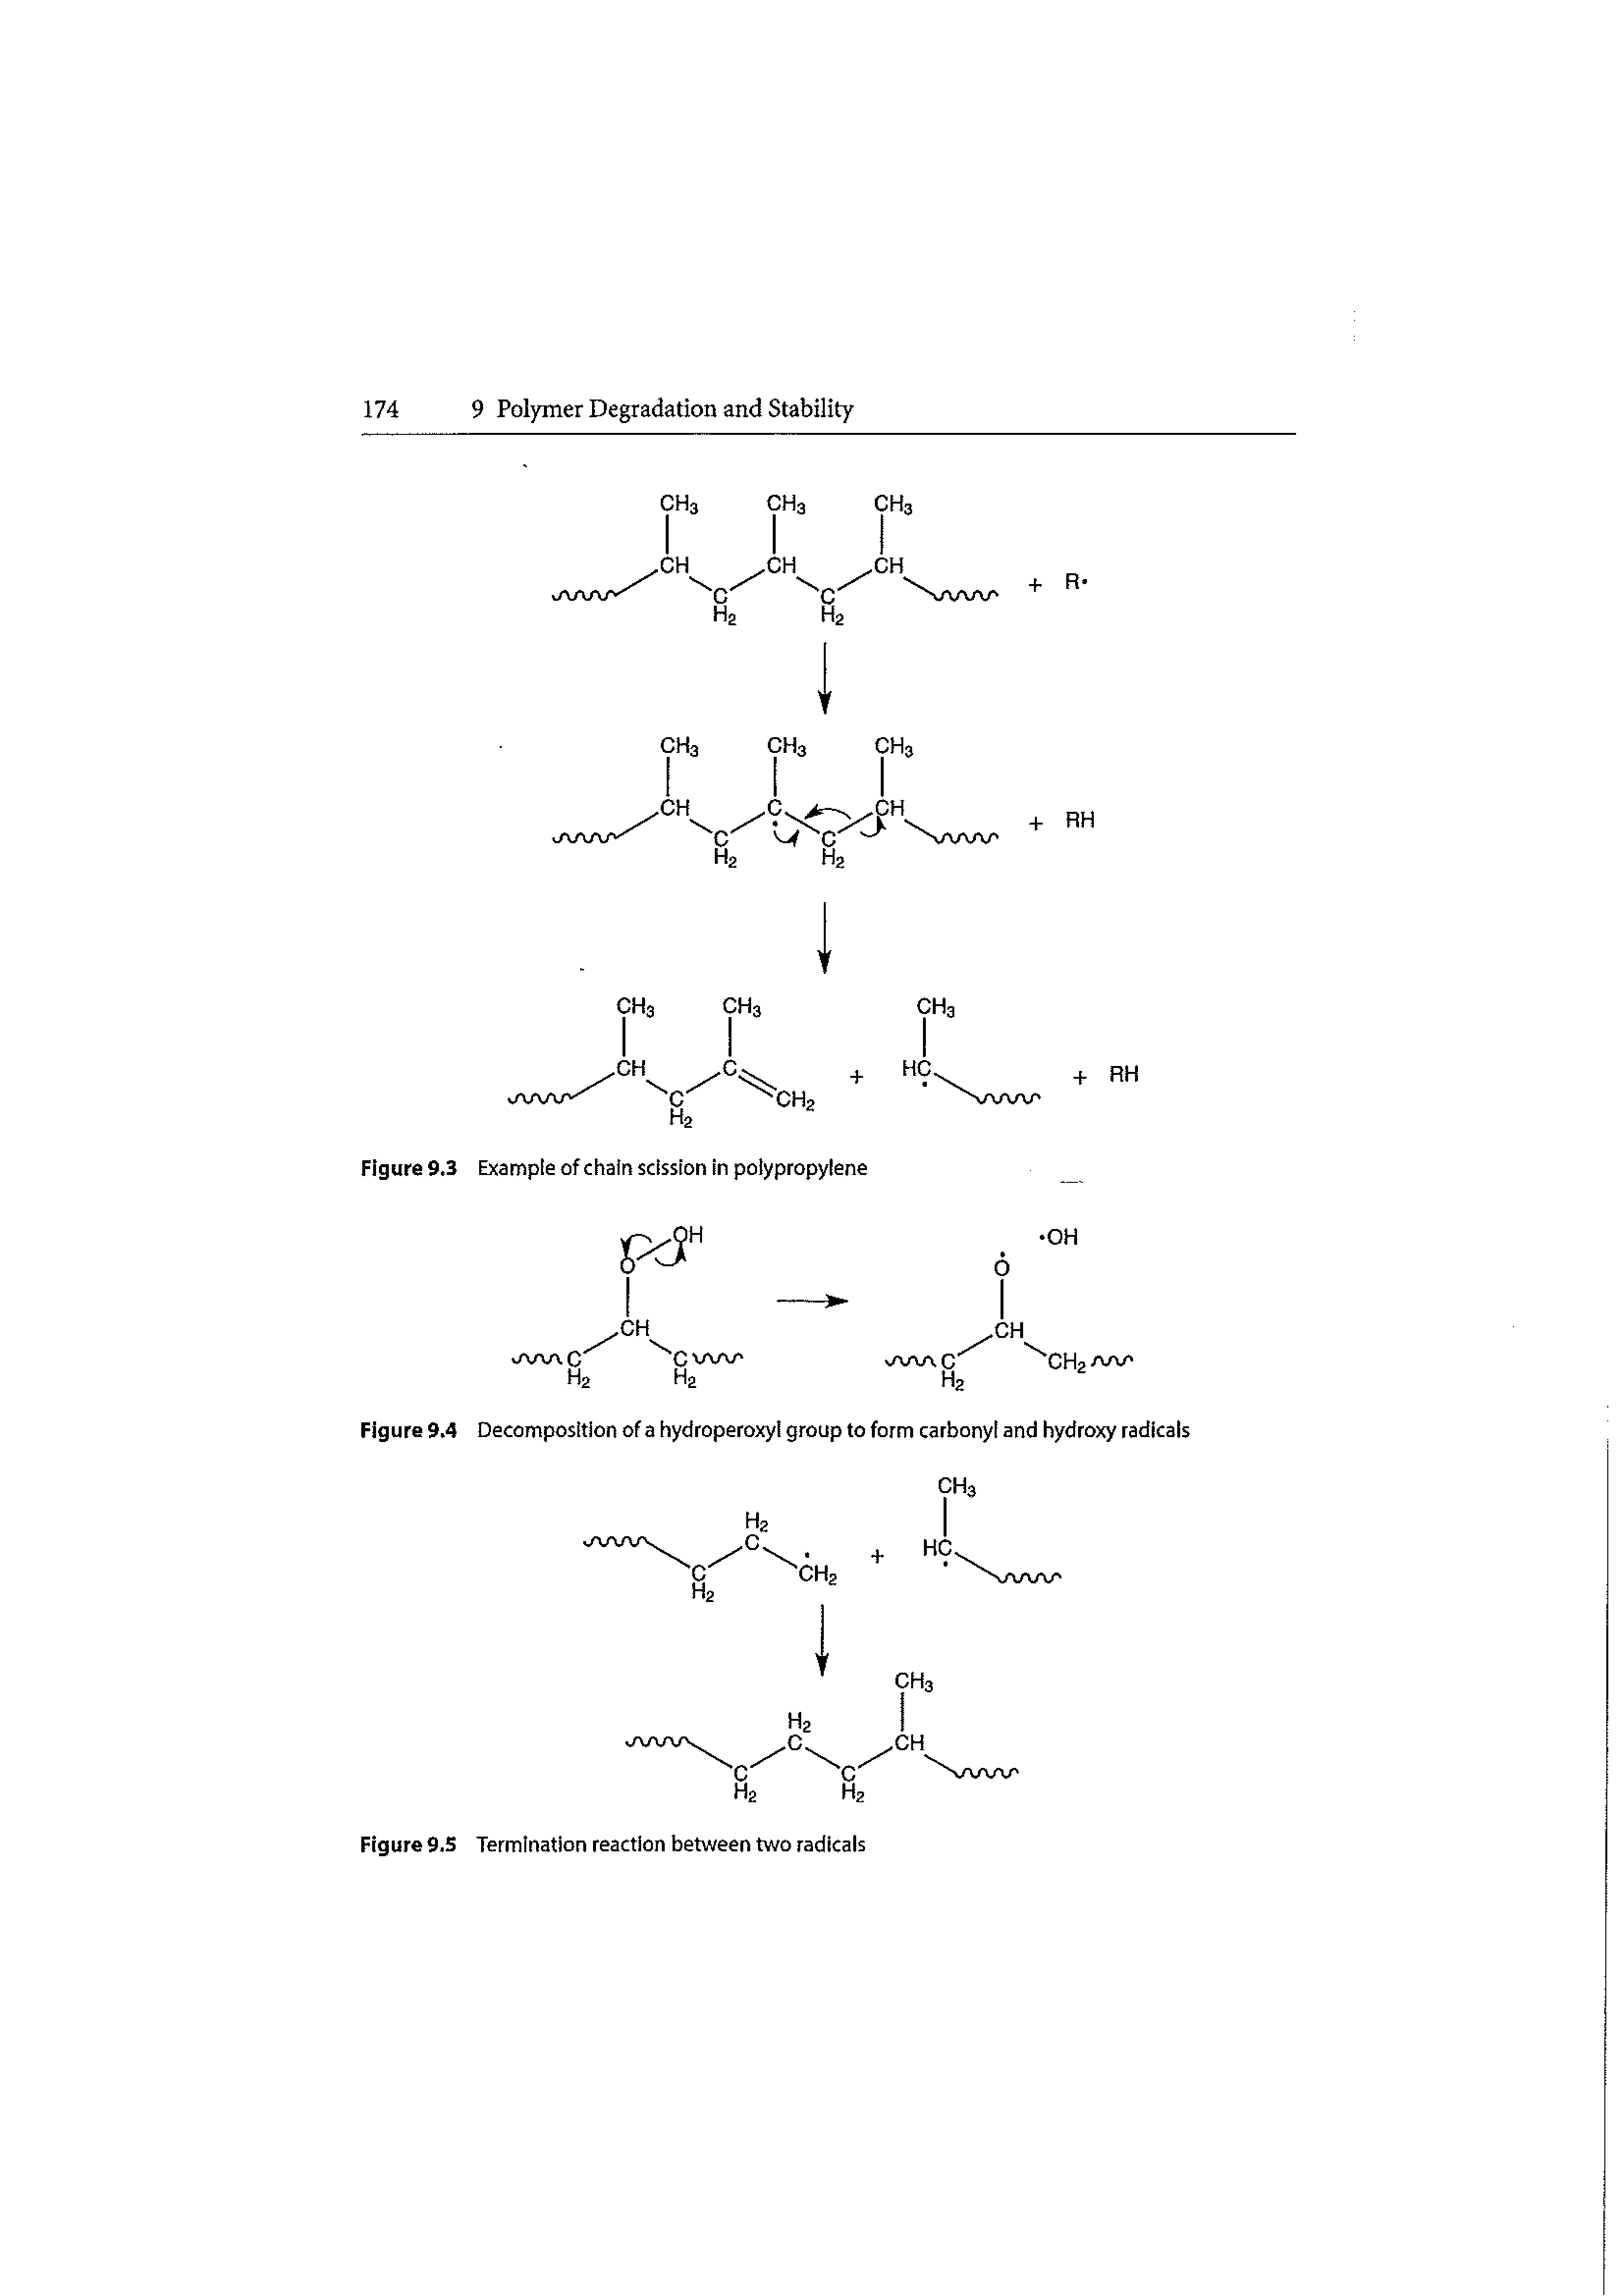 Figure 9.4 Decomposition of a hydroperoxyl group to form carbonyl and hydroxy radicals...